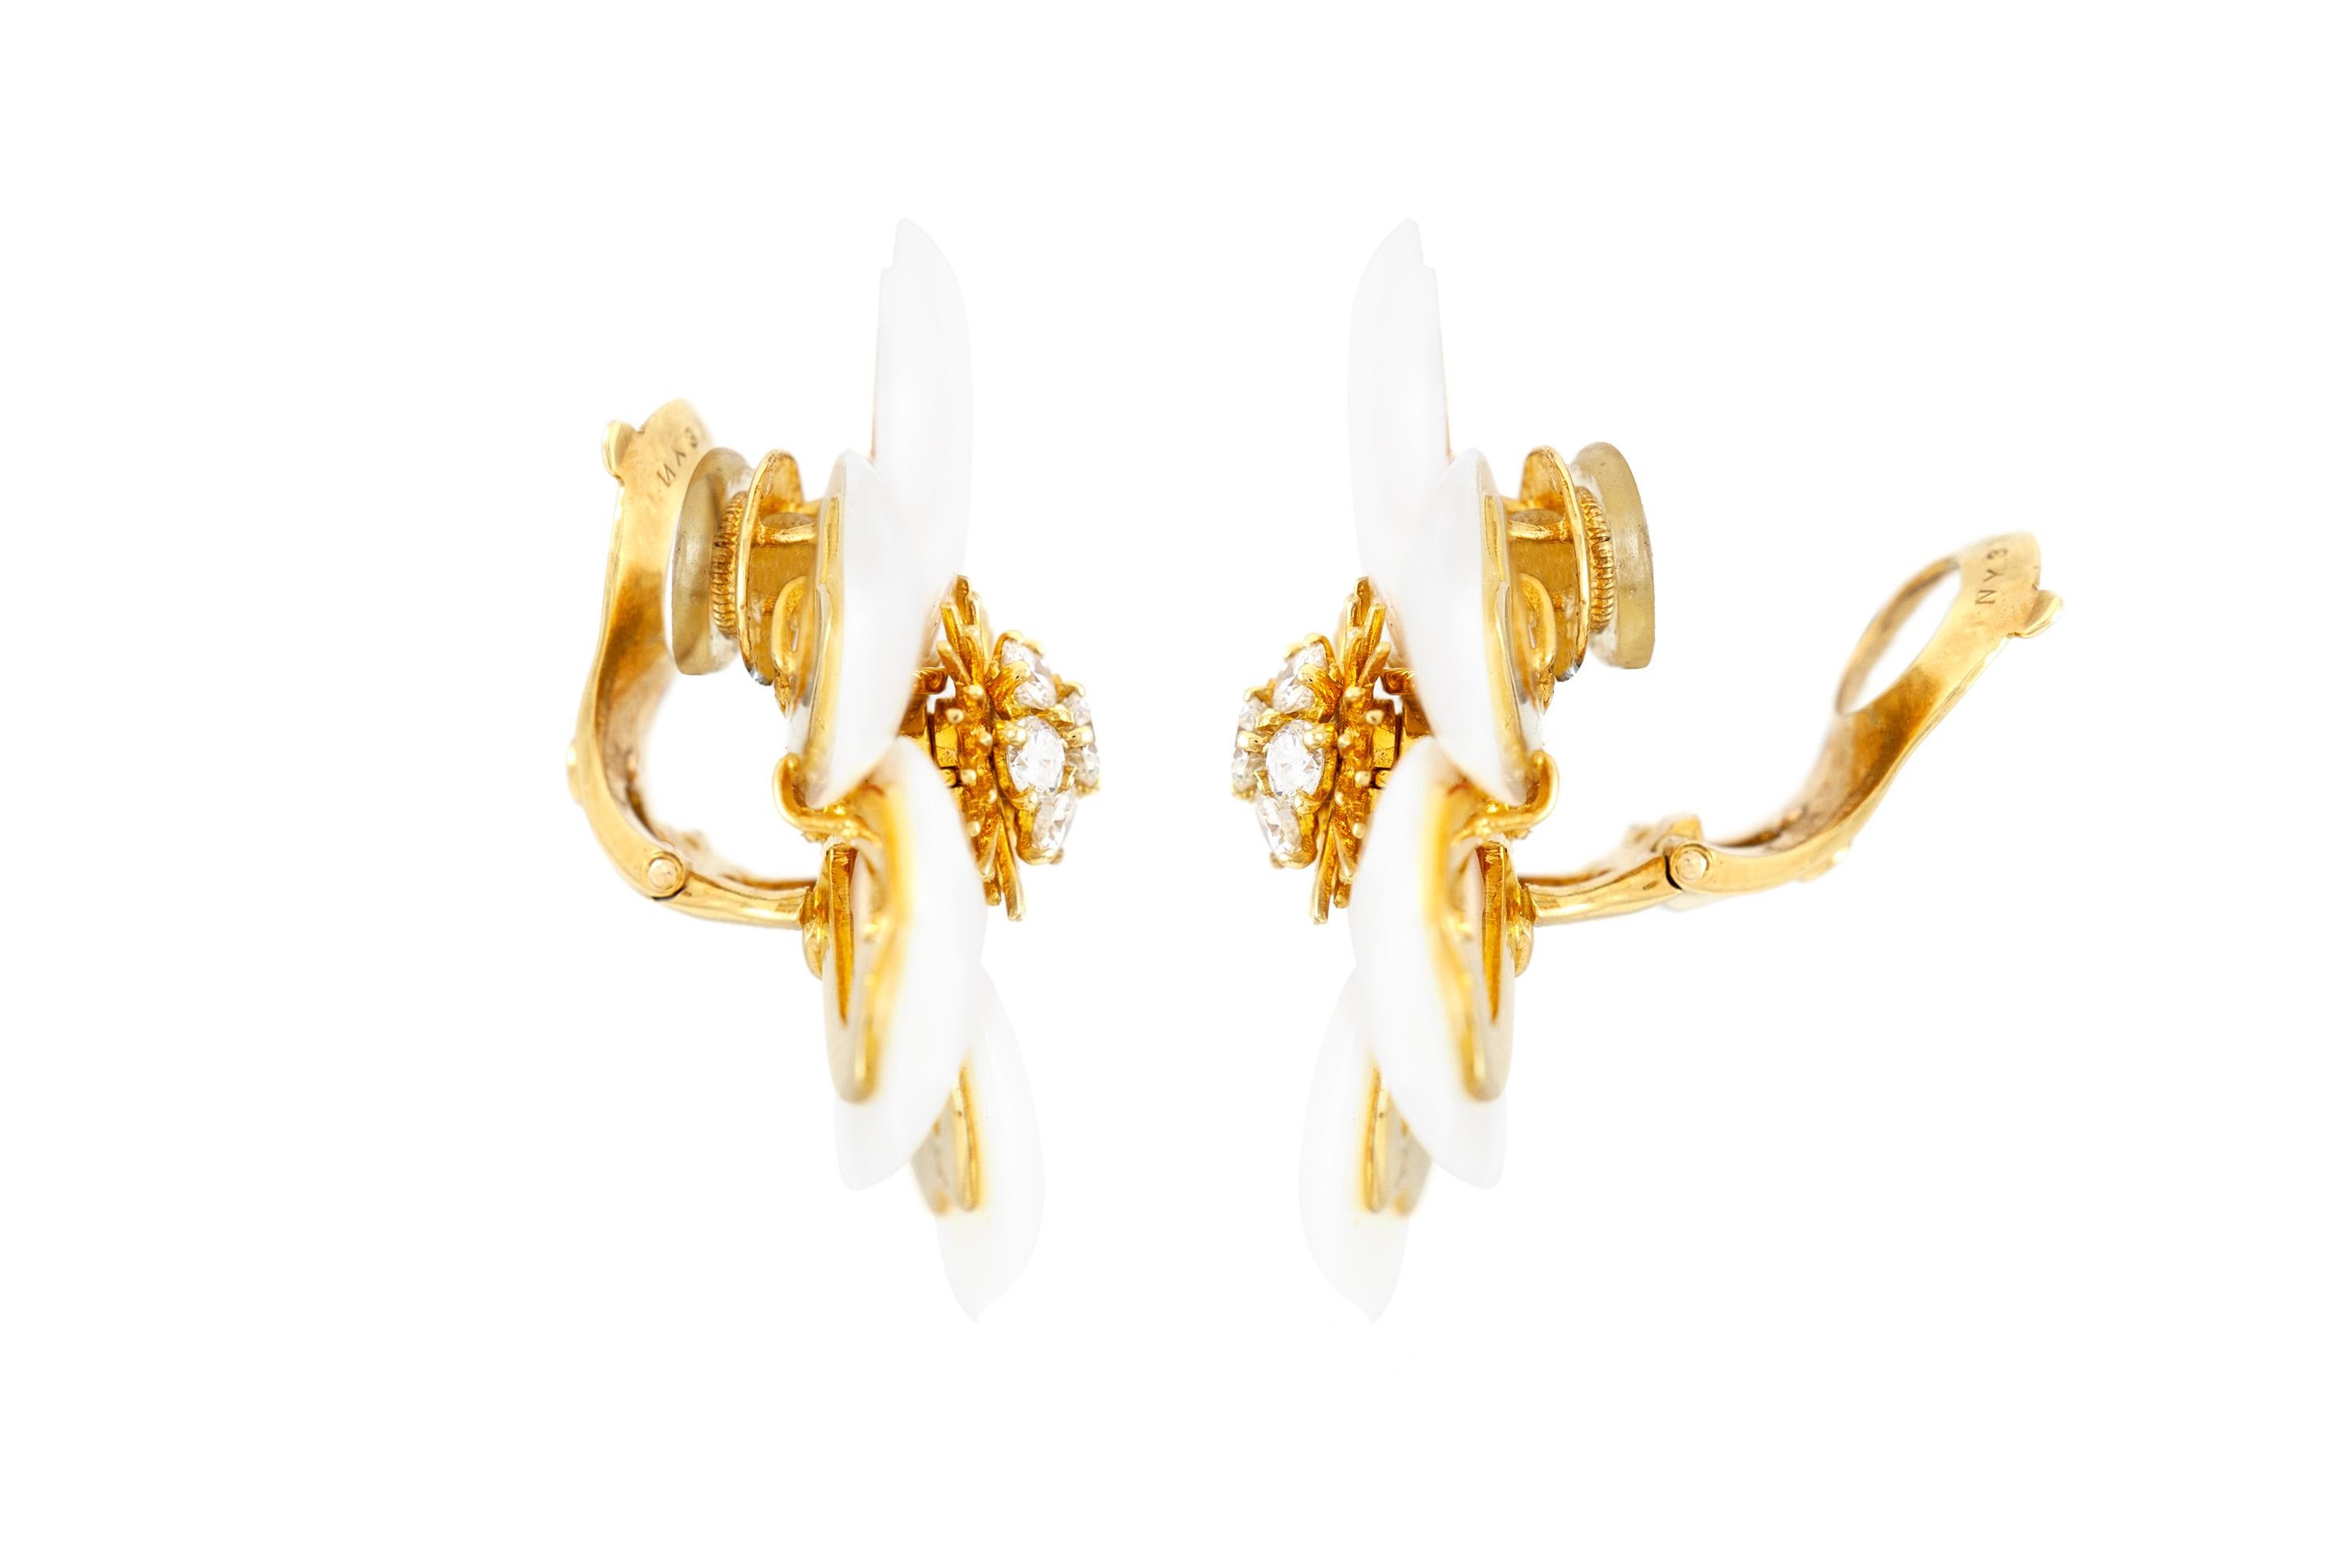 The earrings are finely crafted in 18k yellow gold with diamonds weighing approximately total of 0.72 carat.
Measurment: 36x36
Signed by Van Cleef & Arpels.